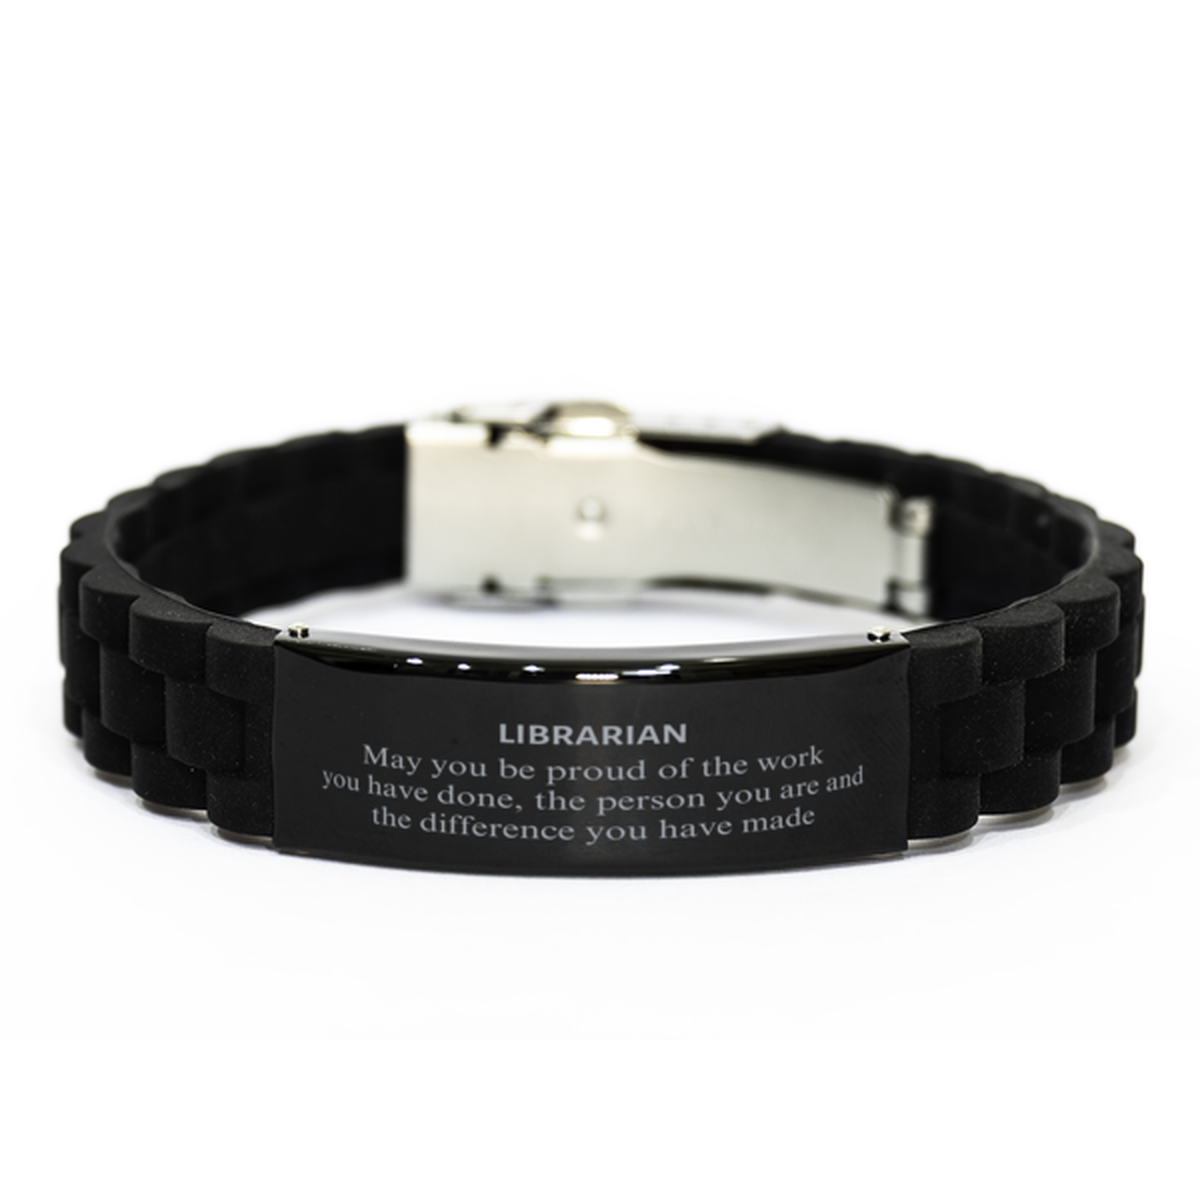 Librarian May you be proud of the work you have done, Retirement Librarian Black Glidelock Clasp Bracelet for Colleague Appreciation Gifts Amazing for Librarian